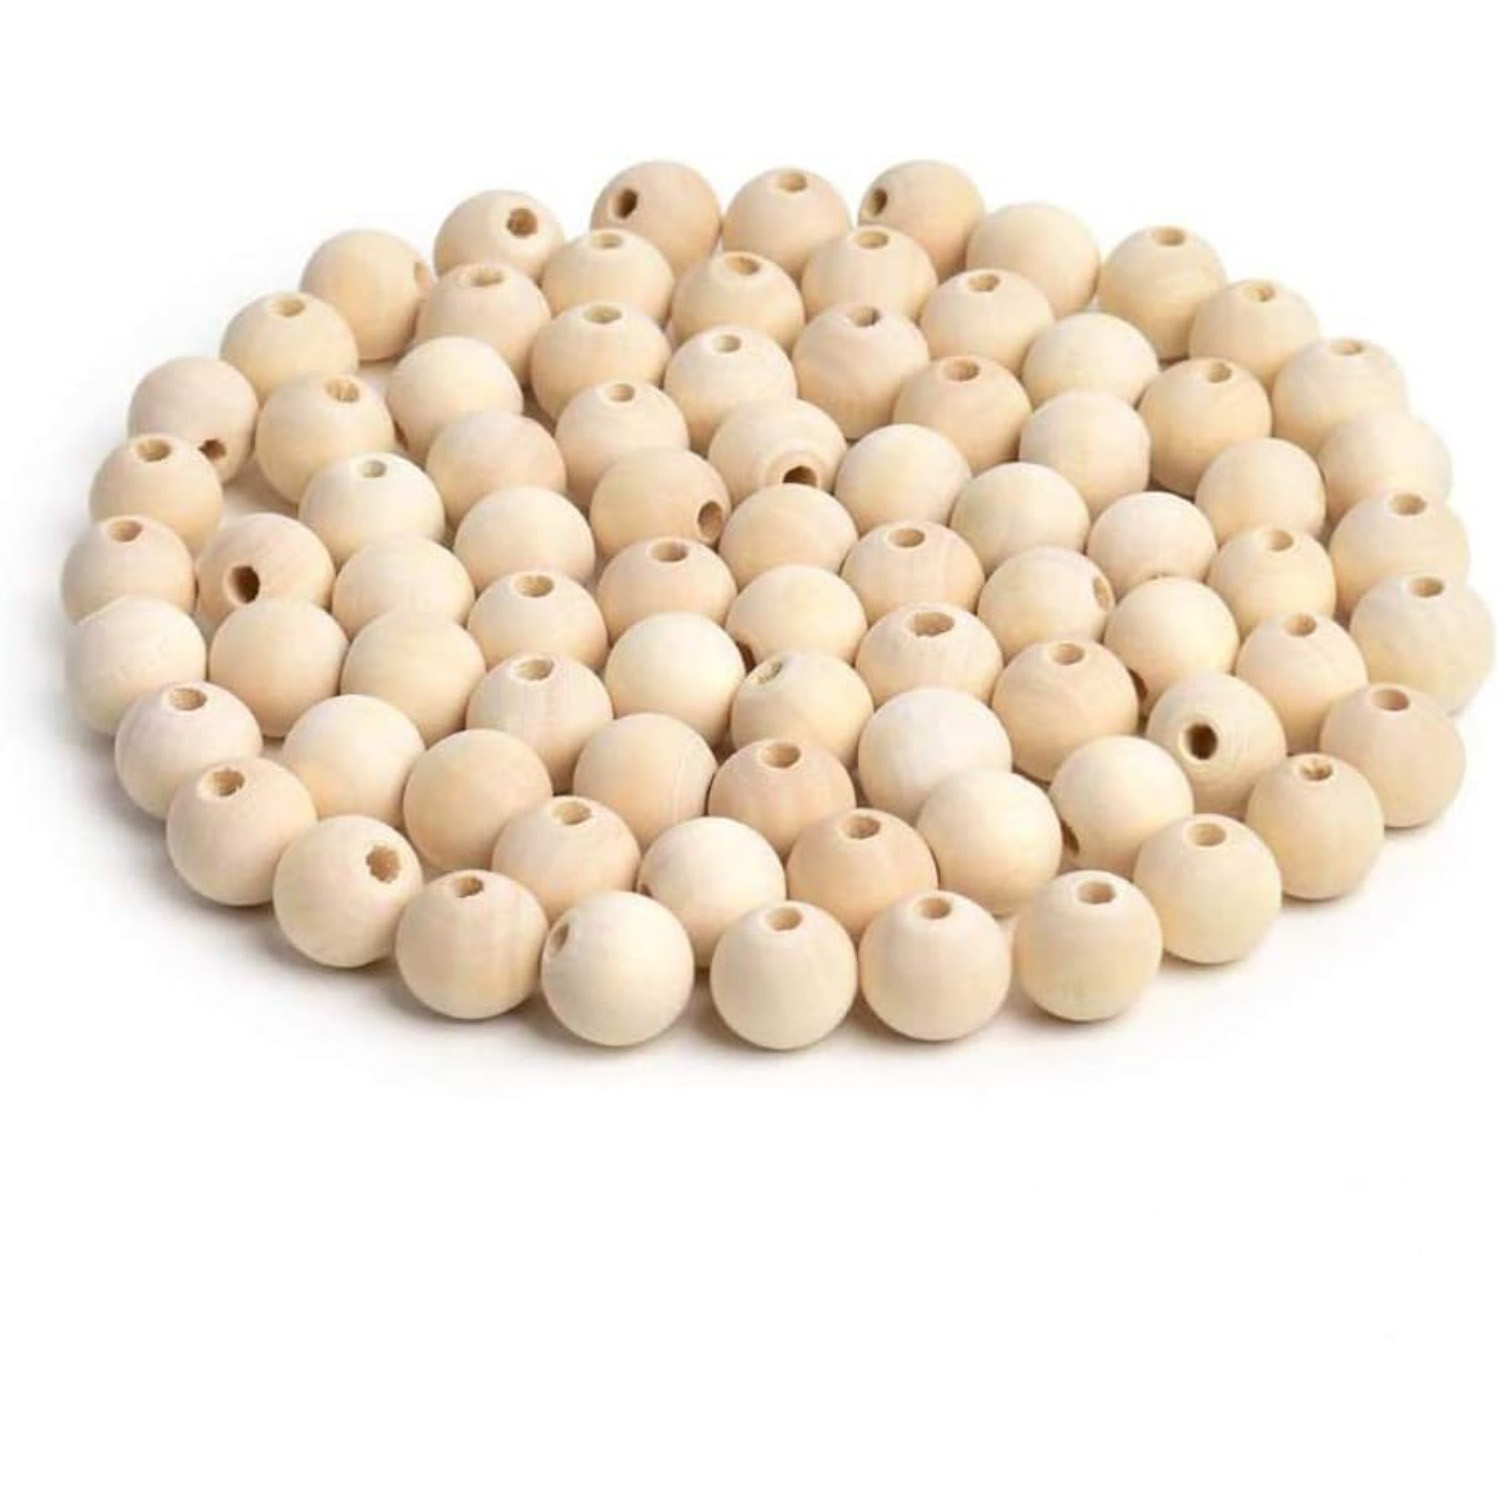 200PCS Craft Wooden Beads(15 mm) - Natural Unfinished Wood Beads - Half  Wooden Beads for Crafts, Painting Woodworking - Decorative Christmas Wooden